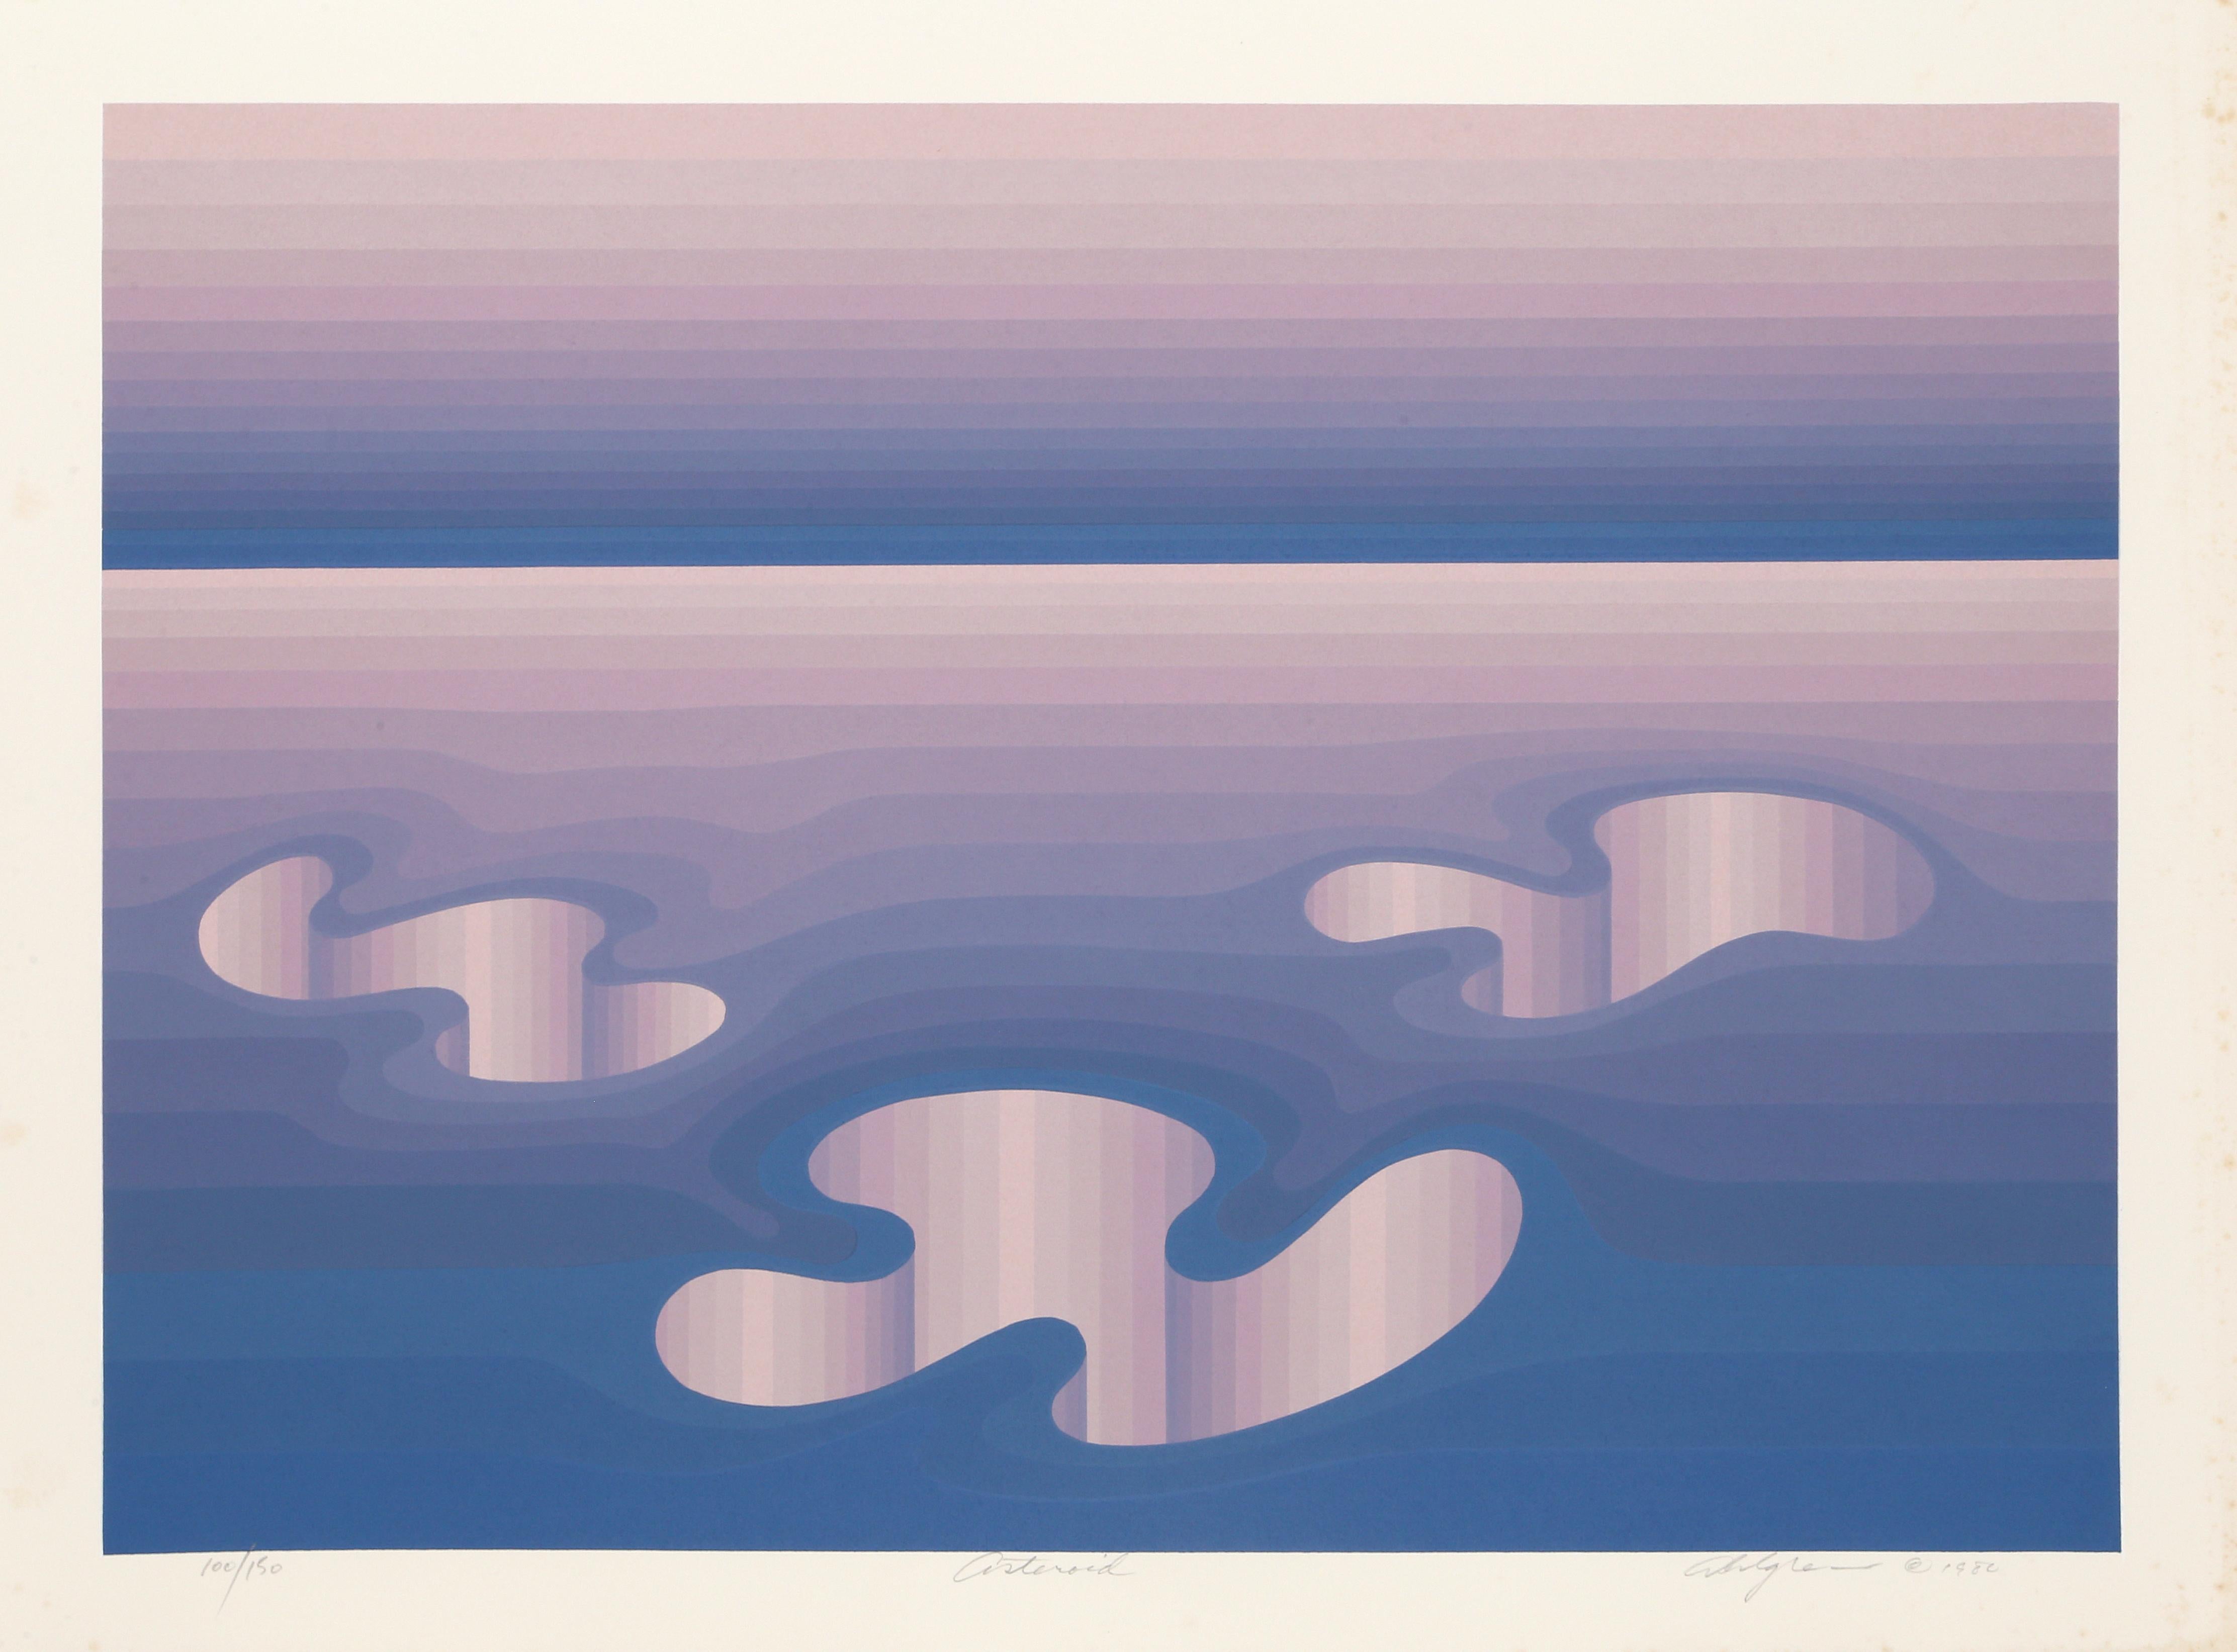 Artist: Roy Ahlgren, American (1927 - 2011)
Title: Asteroid
Year: 1982
Medium: Screenprint, signed, numbered, titled, and dated in pencil 
Edition: 150
Size: 22 x 30 in. (55.88 x 76.2 cm)